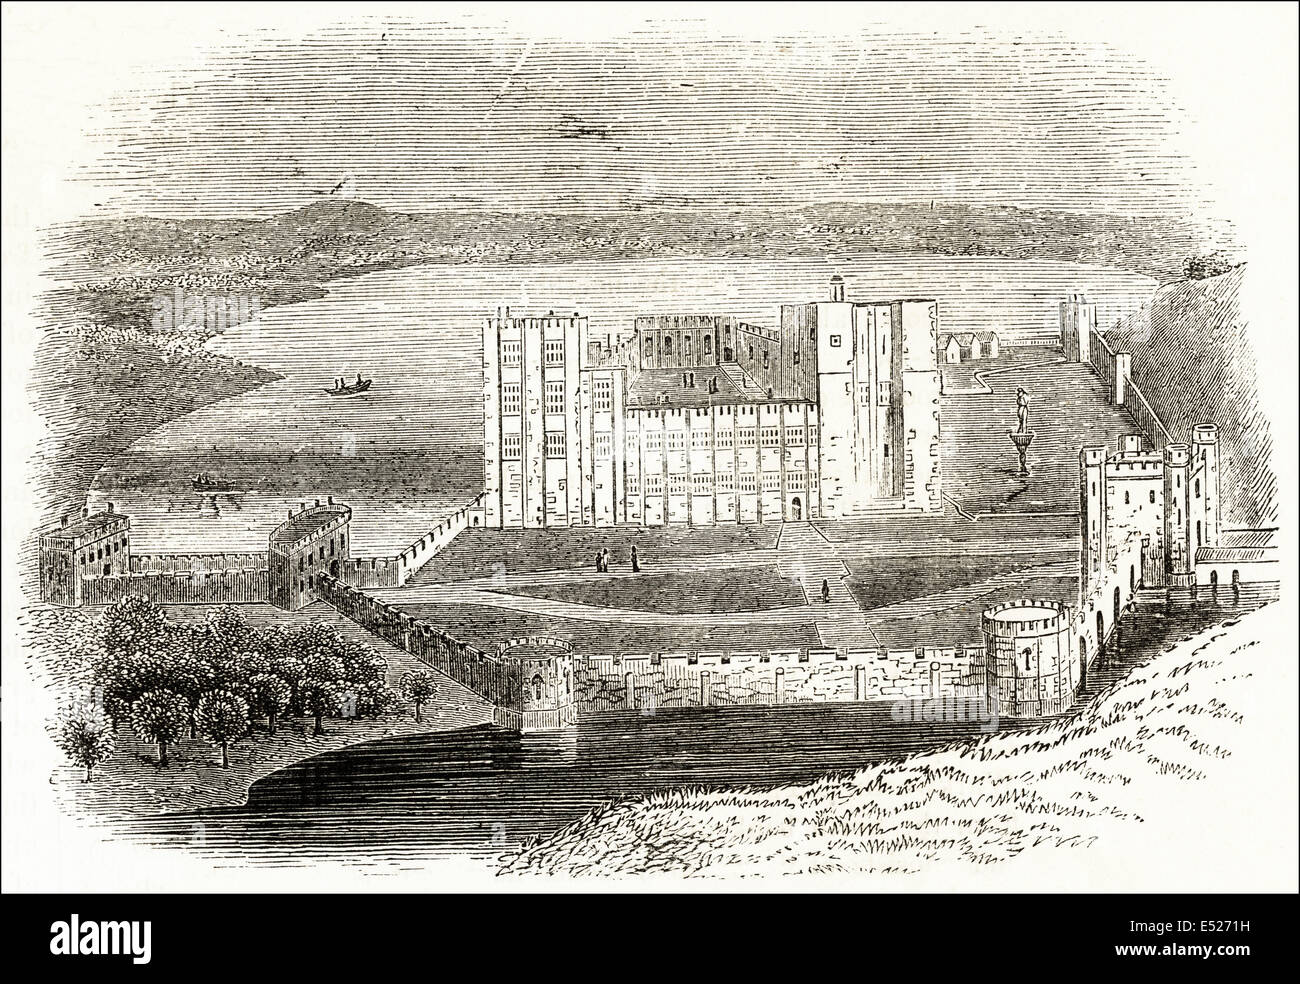 Kenilworth Castle dating from the 12th century, Warwickshire pictured in 1620. Victorian woodcut engraving circa 1845. Stock Photo